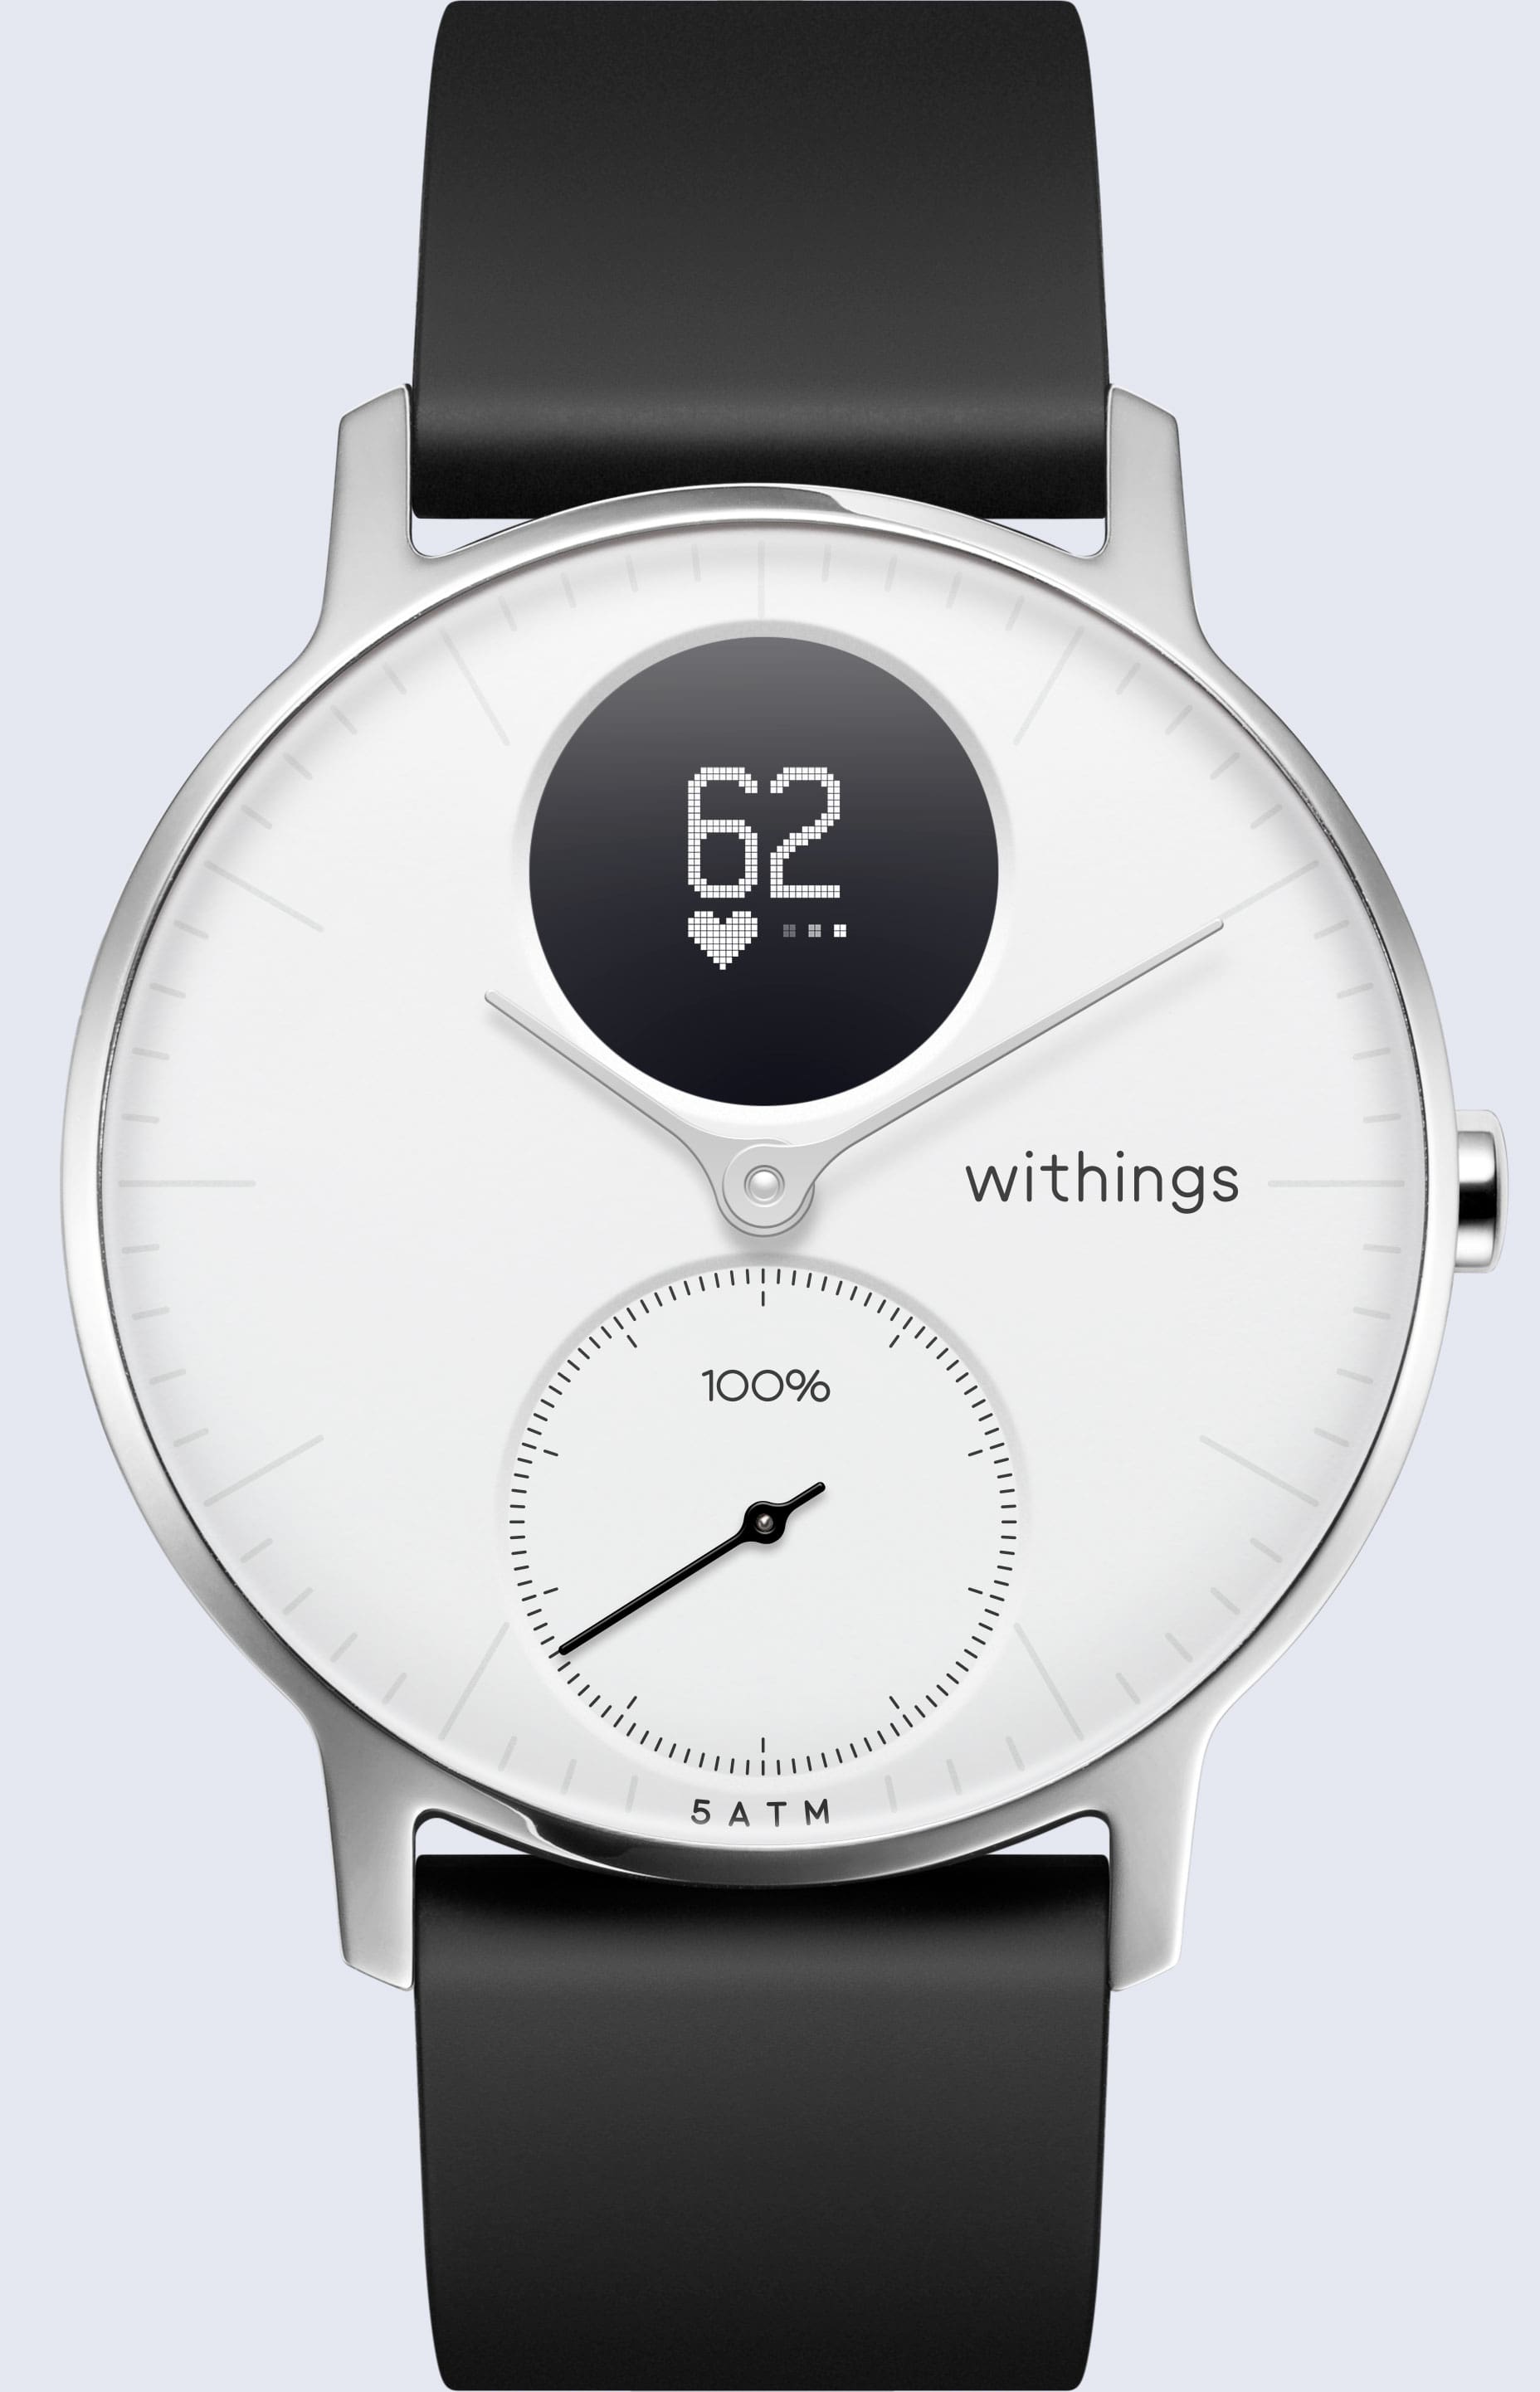 withings tracker